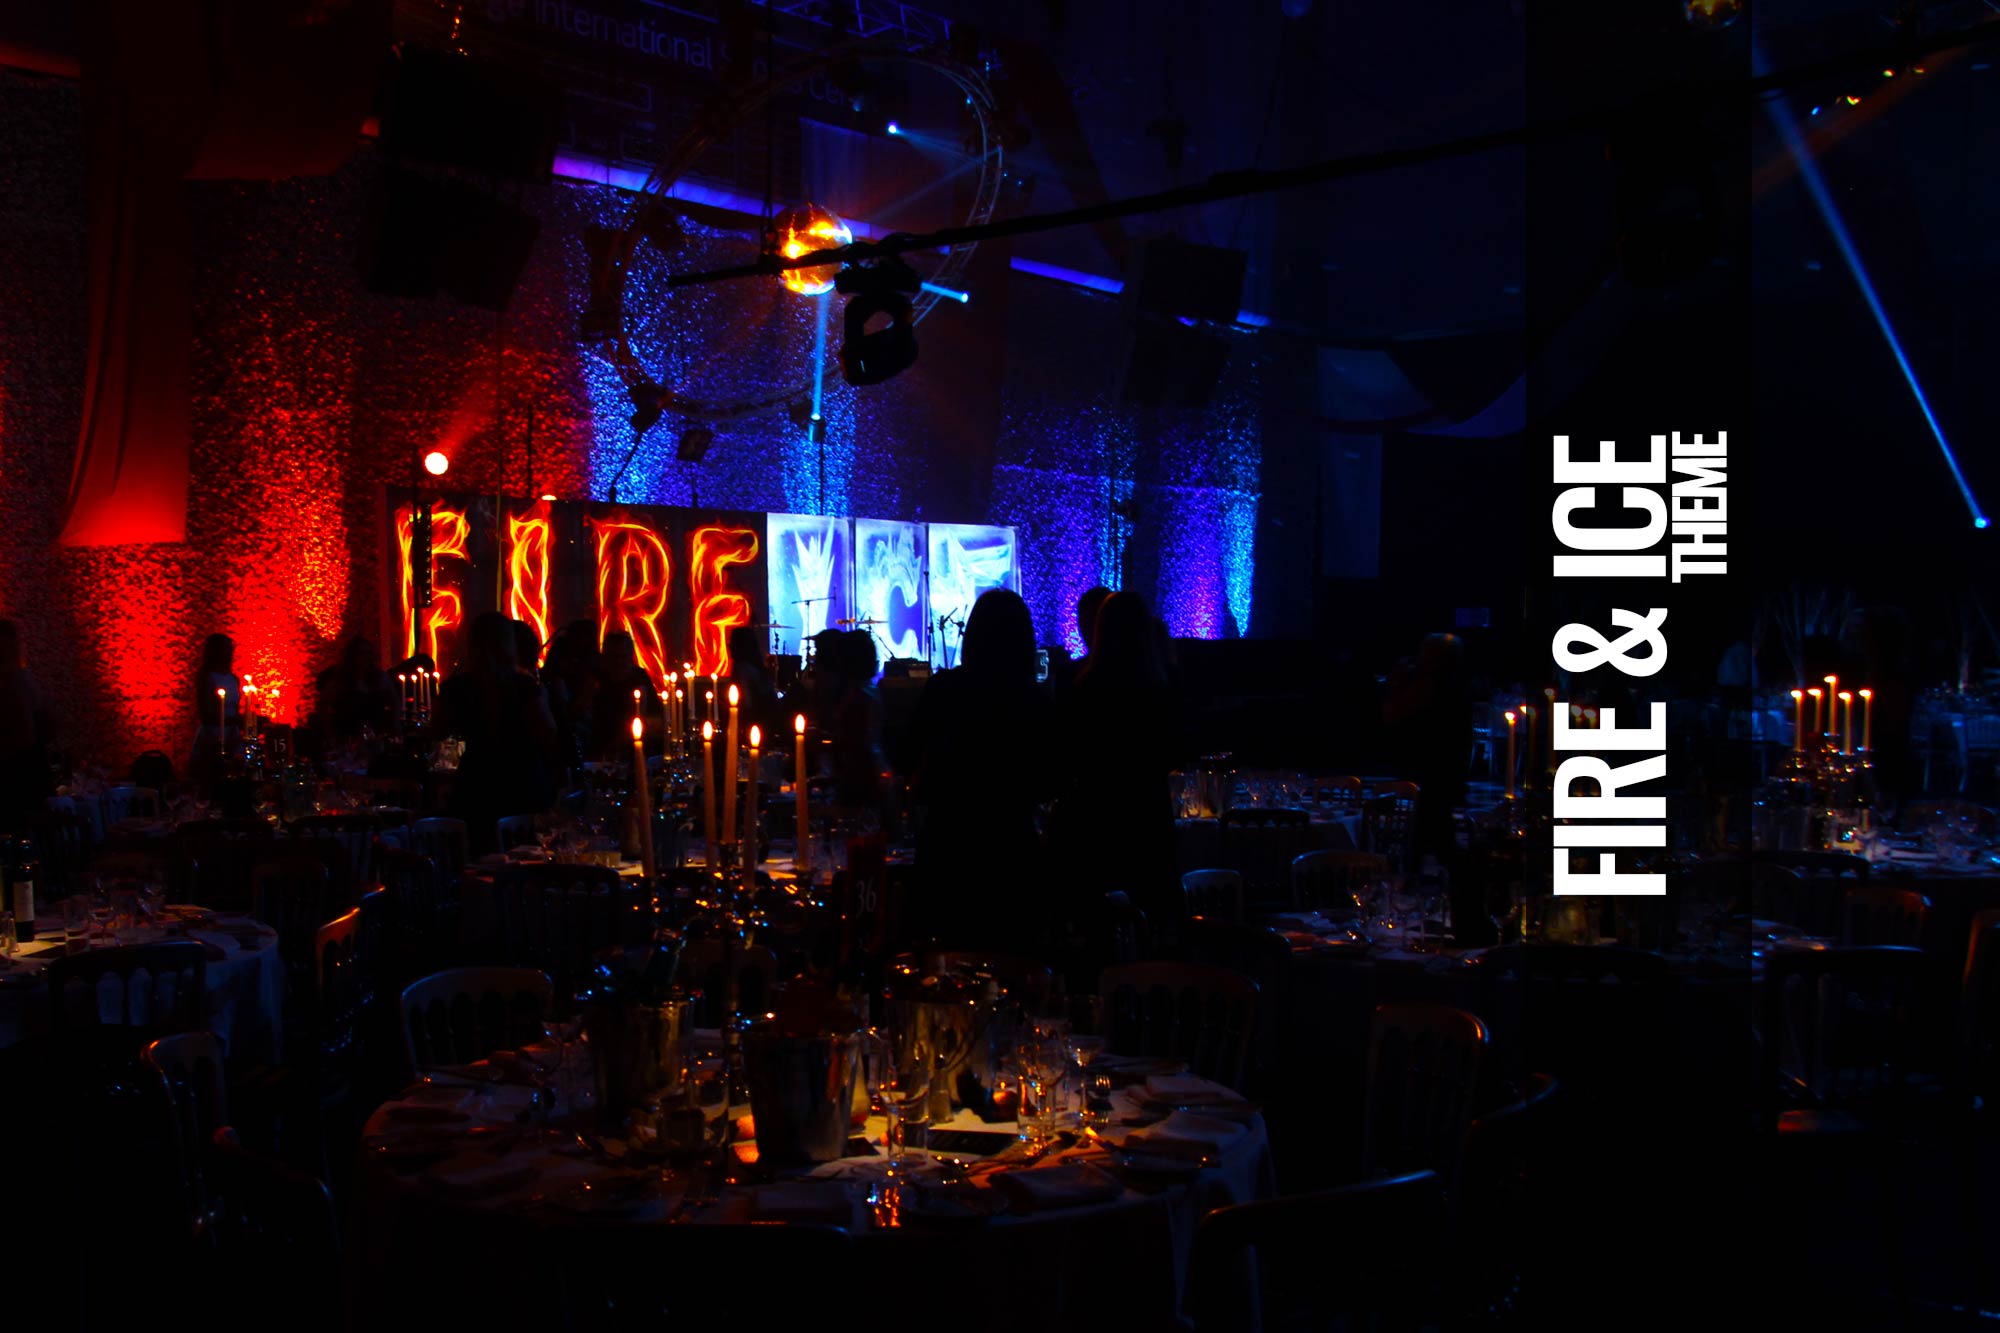 Fire and Ice Party Themed Events